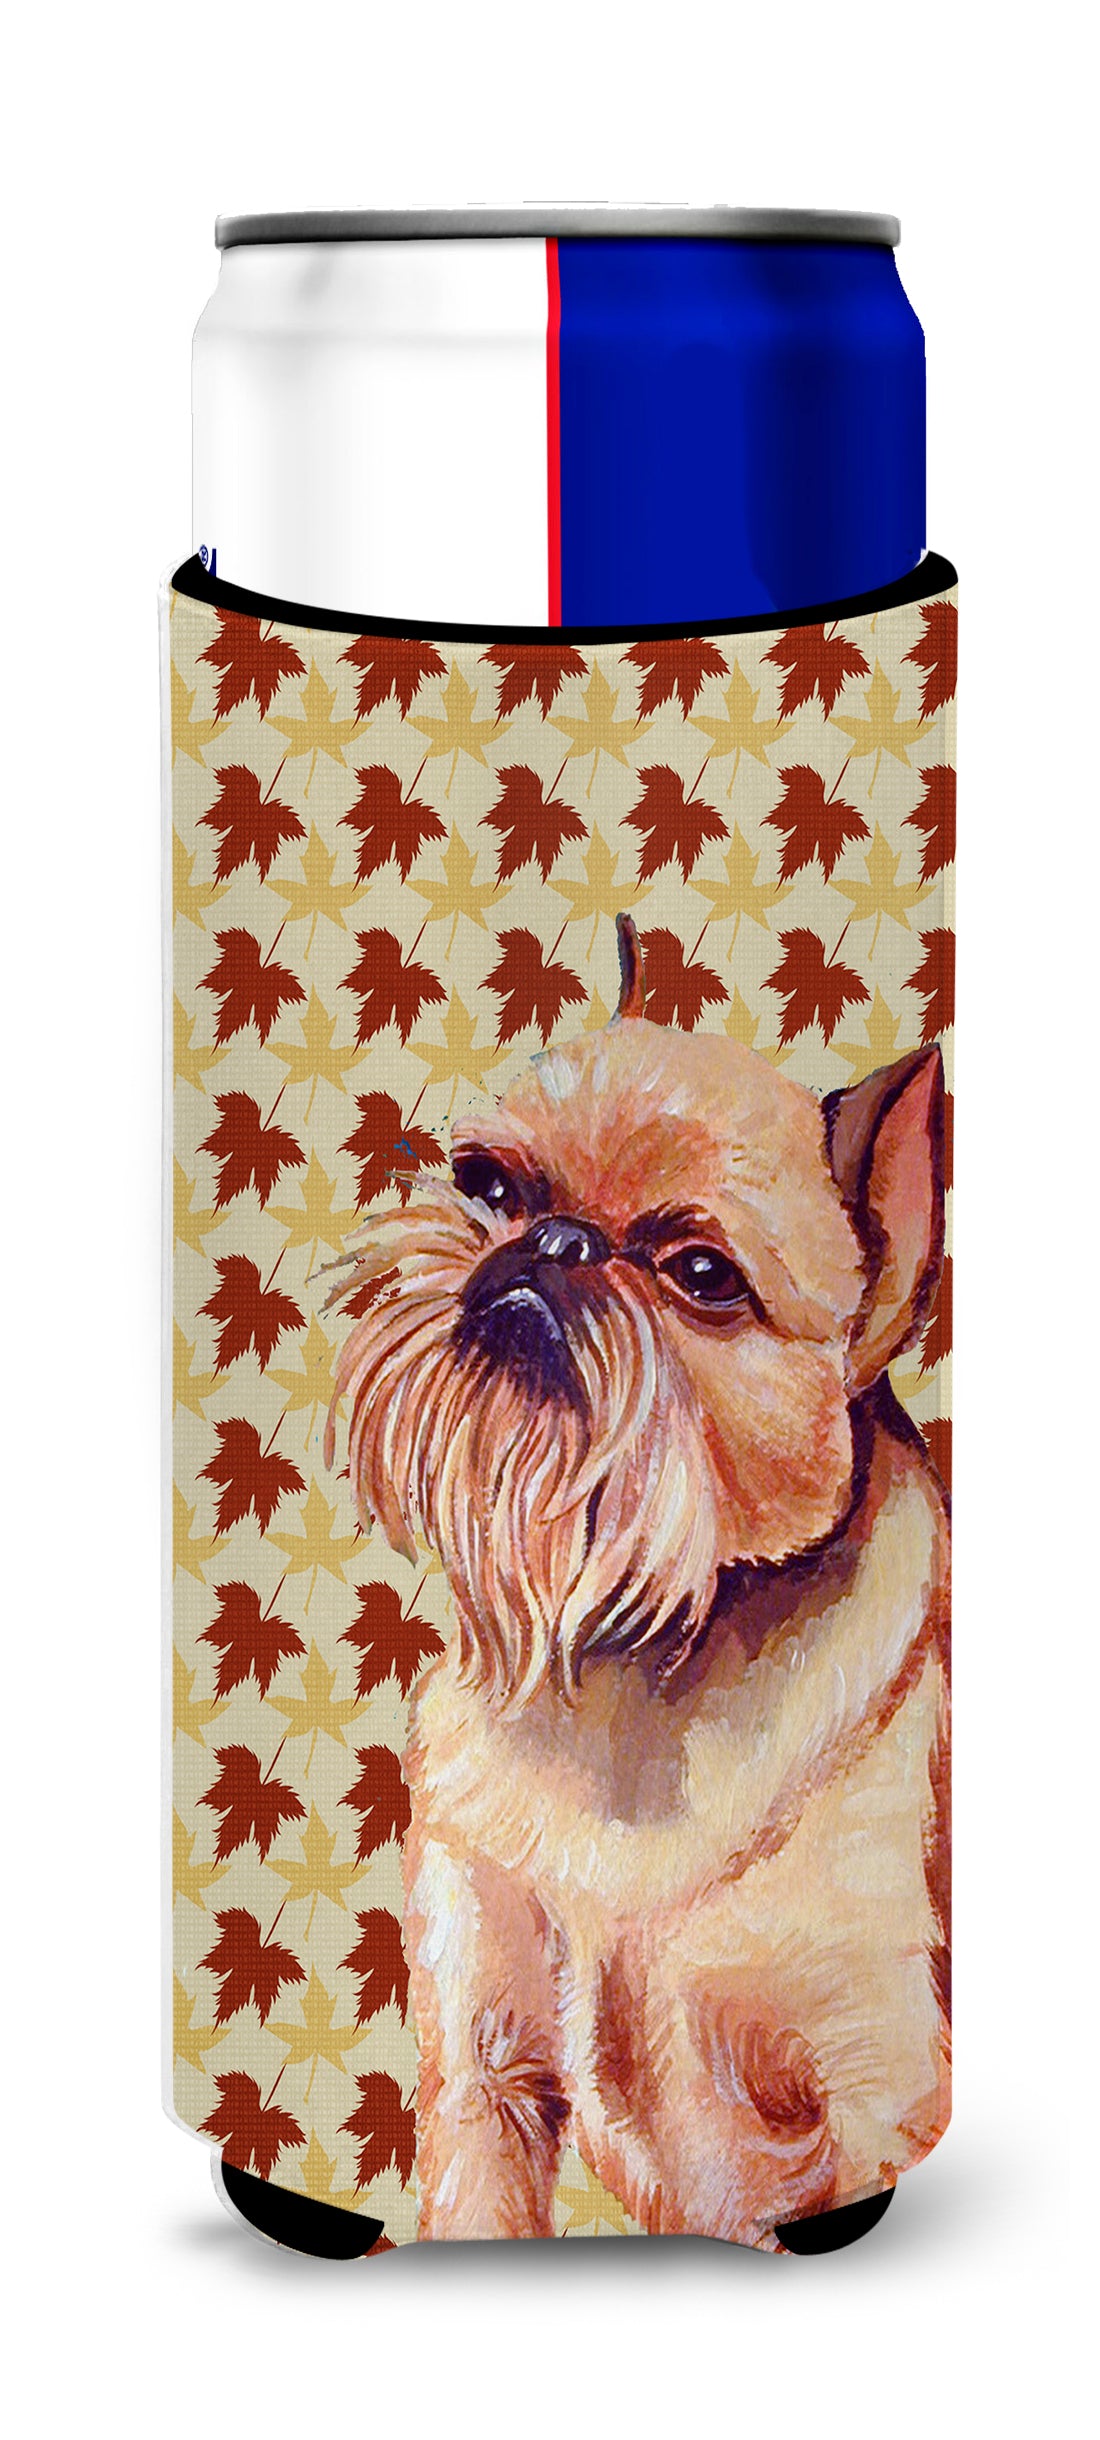 Brussels Griffon Fall Leaves Portrait Ultra Beverage Insulators for slim cans LH9089MUK